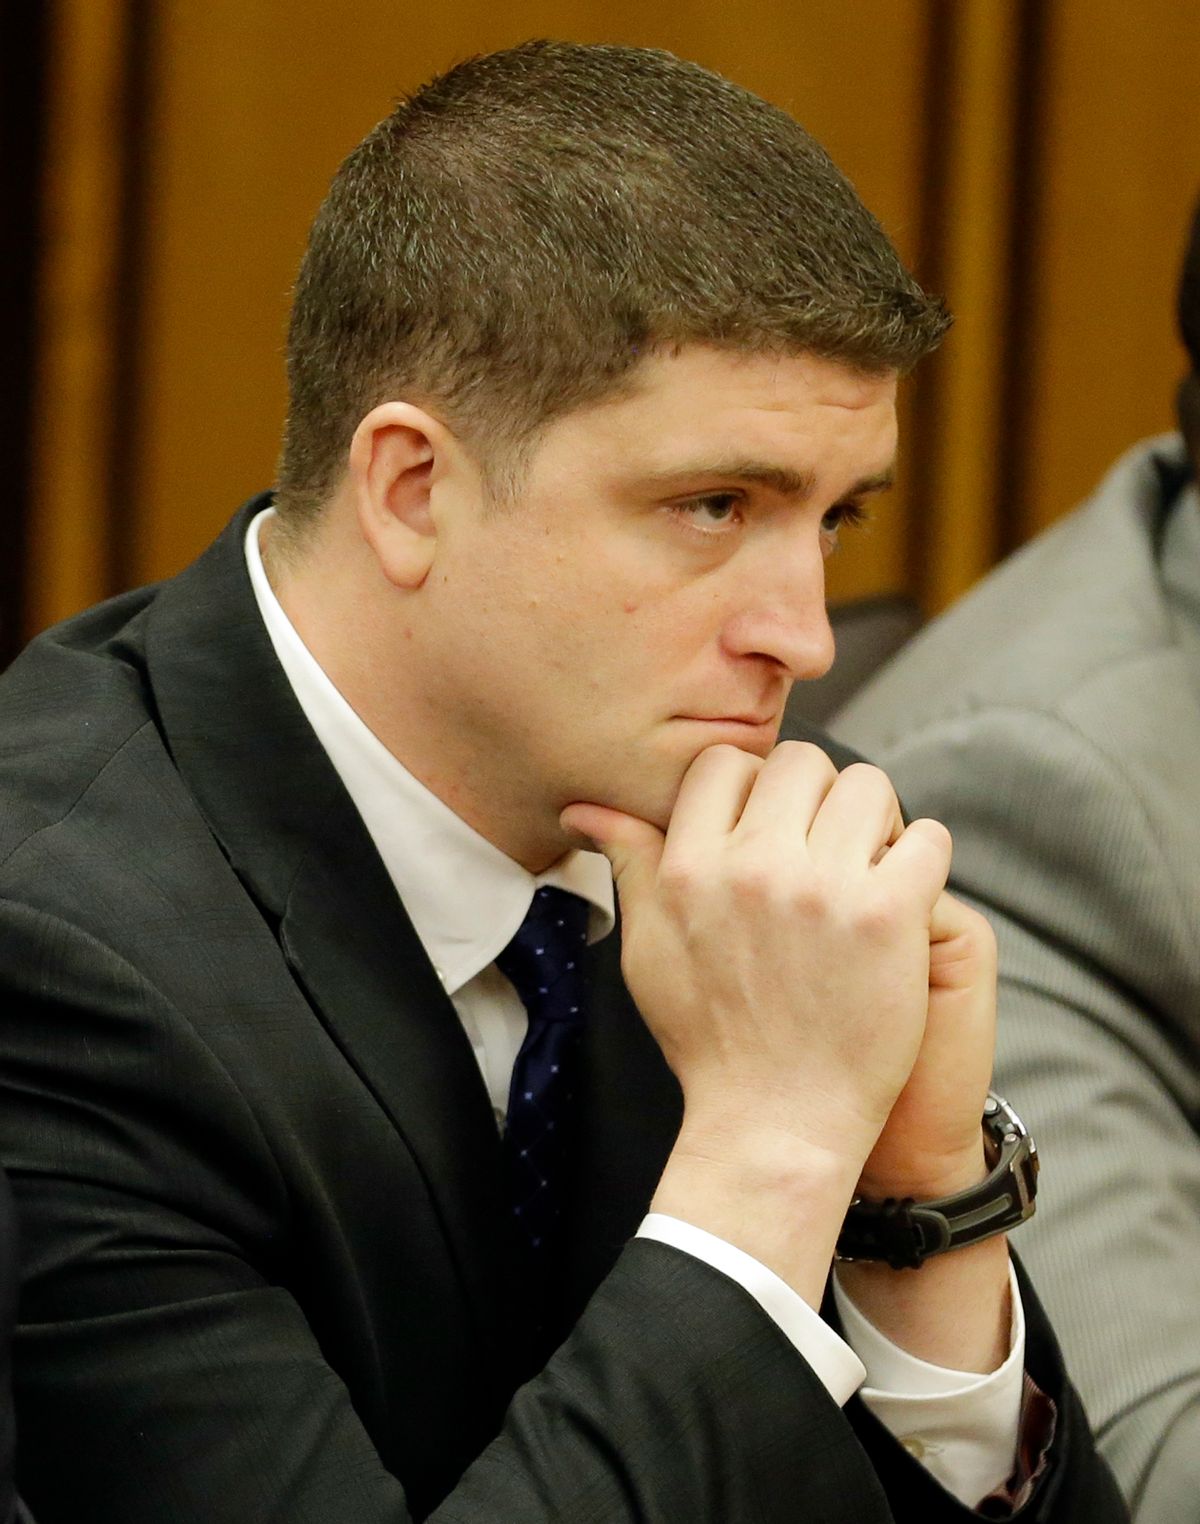 Michael Brelo listens to the judge read his verdict Saturday, May 23, 2015, in Cleveland. Brelo, a patrolman charged in the shooting deaths of two unarmed suspects during a 137-shot barrage of gunfire was acquitted Saturday in a case that helped prompt the U.S. Department of Justice determine the city police department had a history of using excessive force and violating civil rights. (AP Photo/Tony Dejak) (AP)